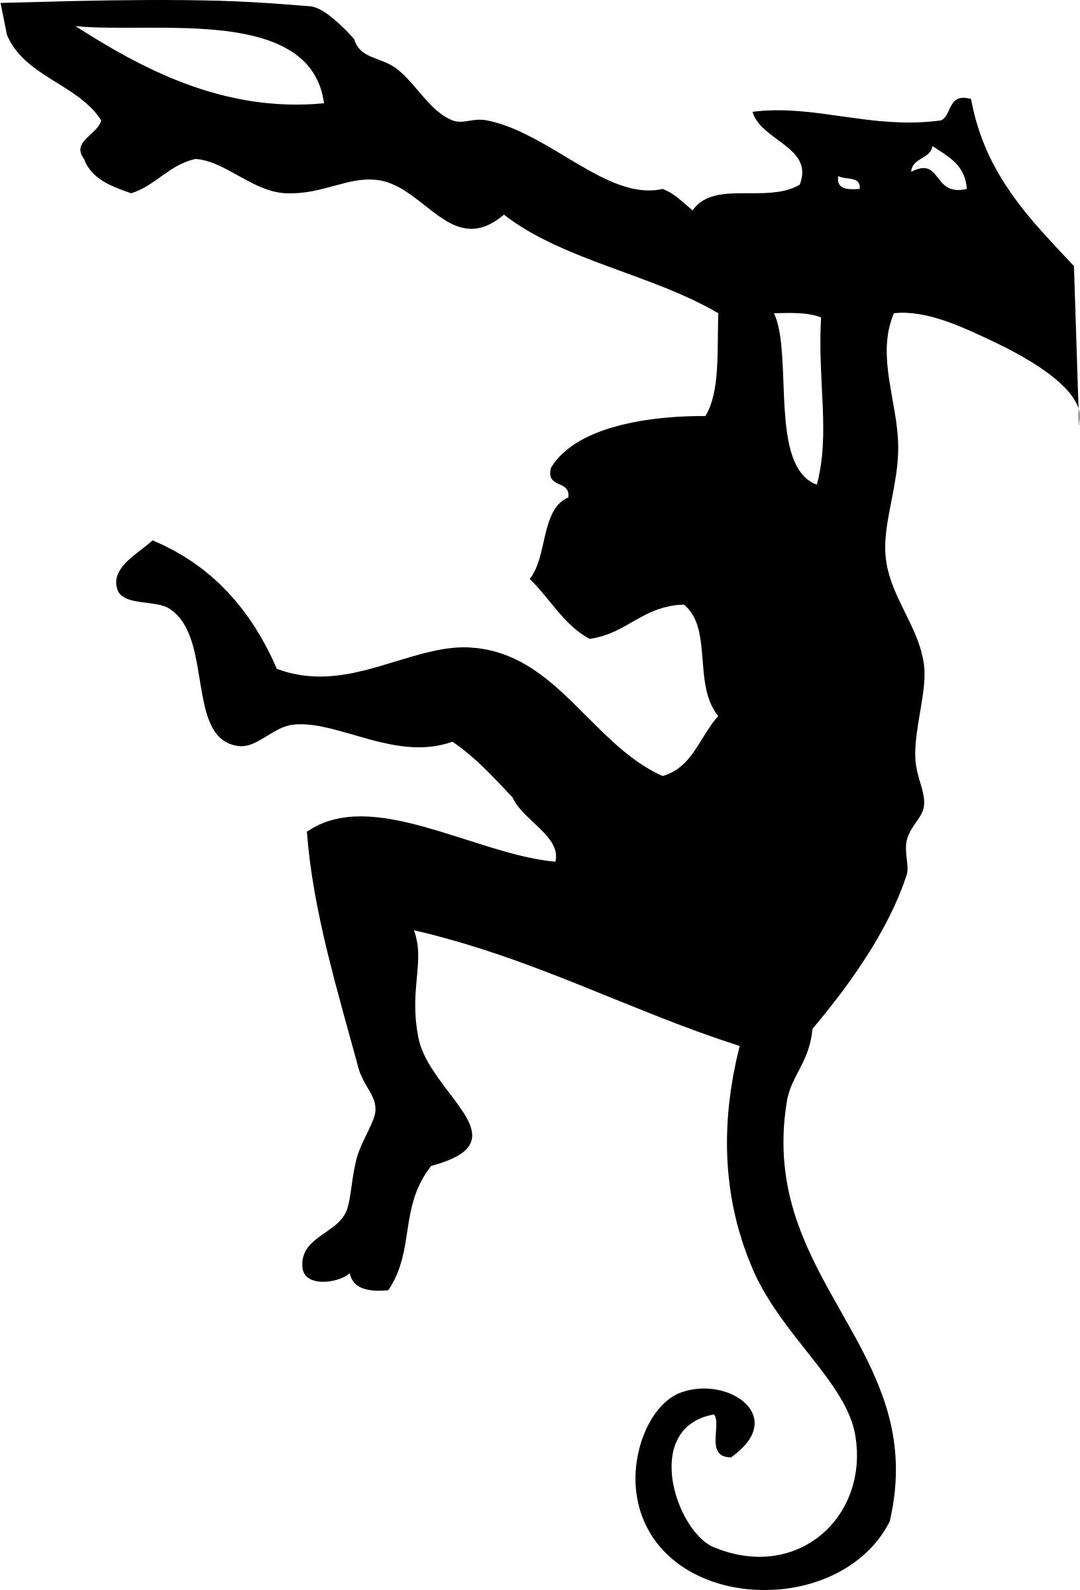 monkey silhouette png transparent